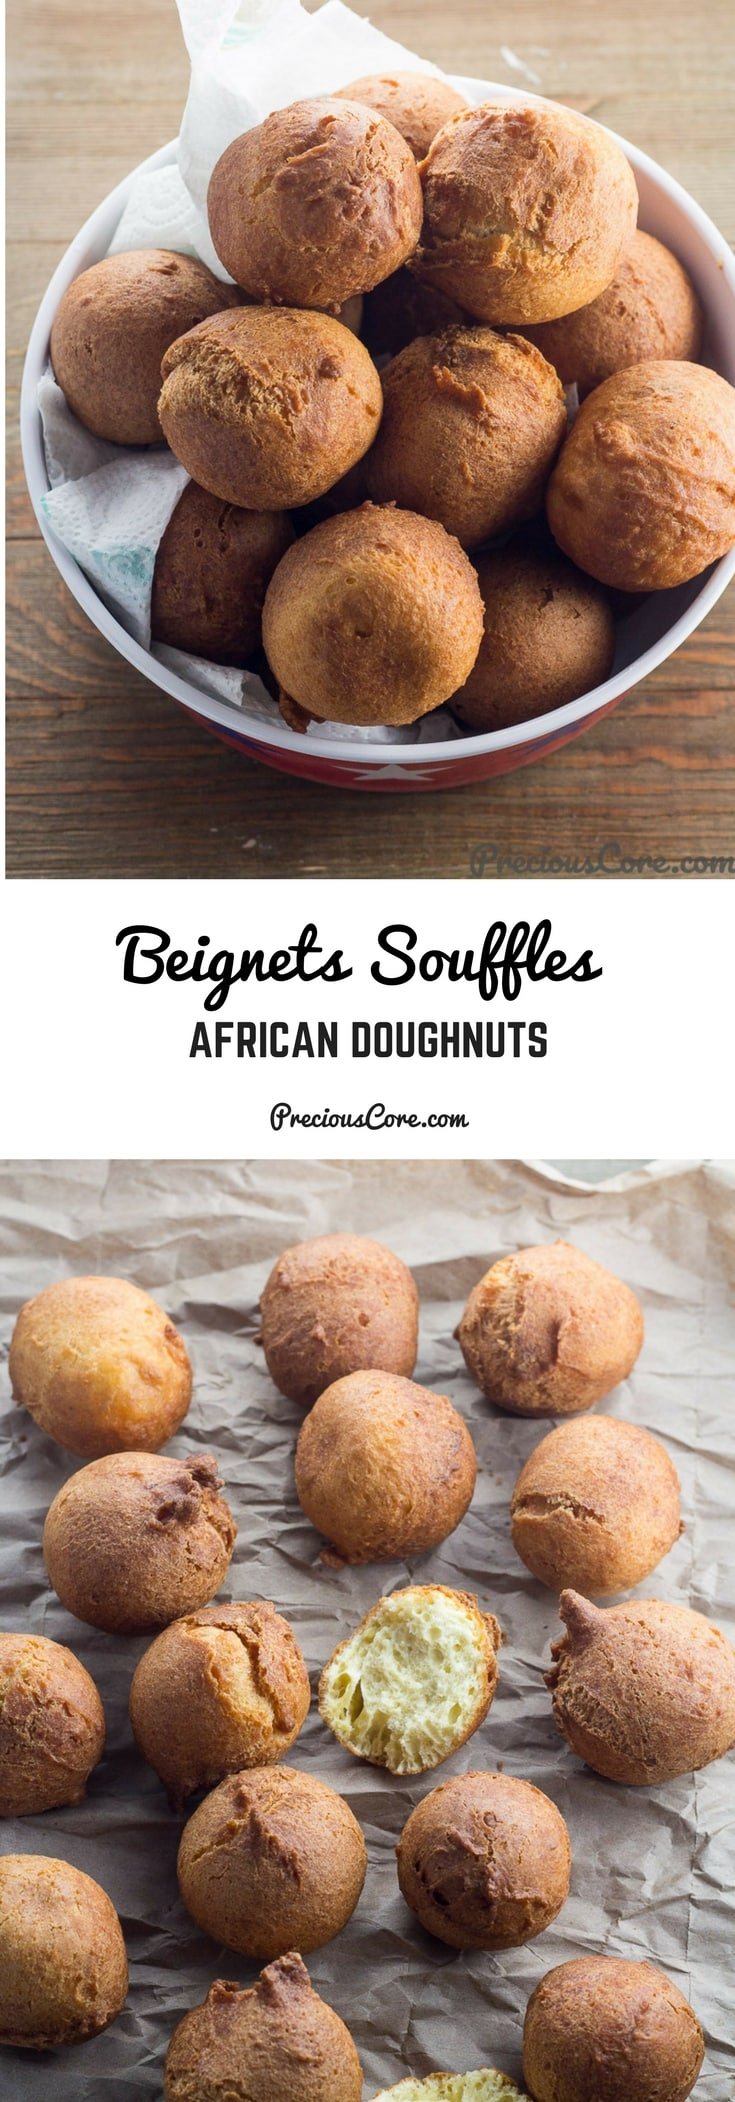 These beignets souffles taste like cake but so much better! You only need 30 minutes to make this tasty snack. Use it to entertain guests, enjoy with coffee or tea or for breakfast. It is such a treat! Get the recipe on Precious Core. #beignets #doughnuts #breakfast